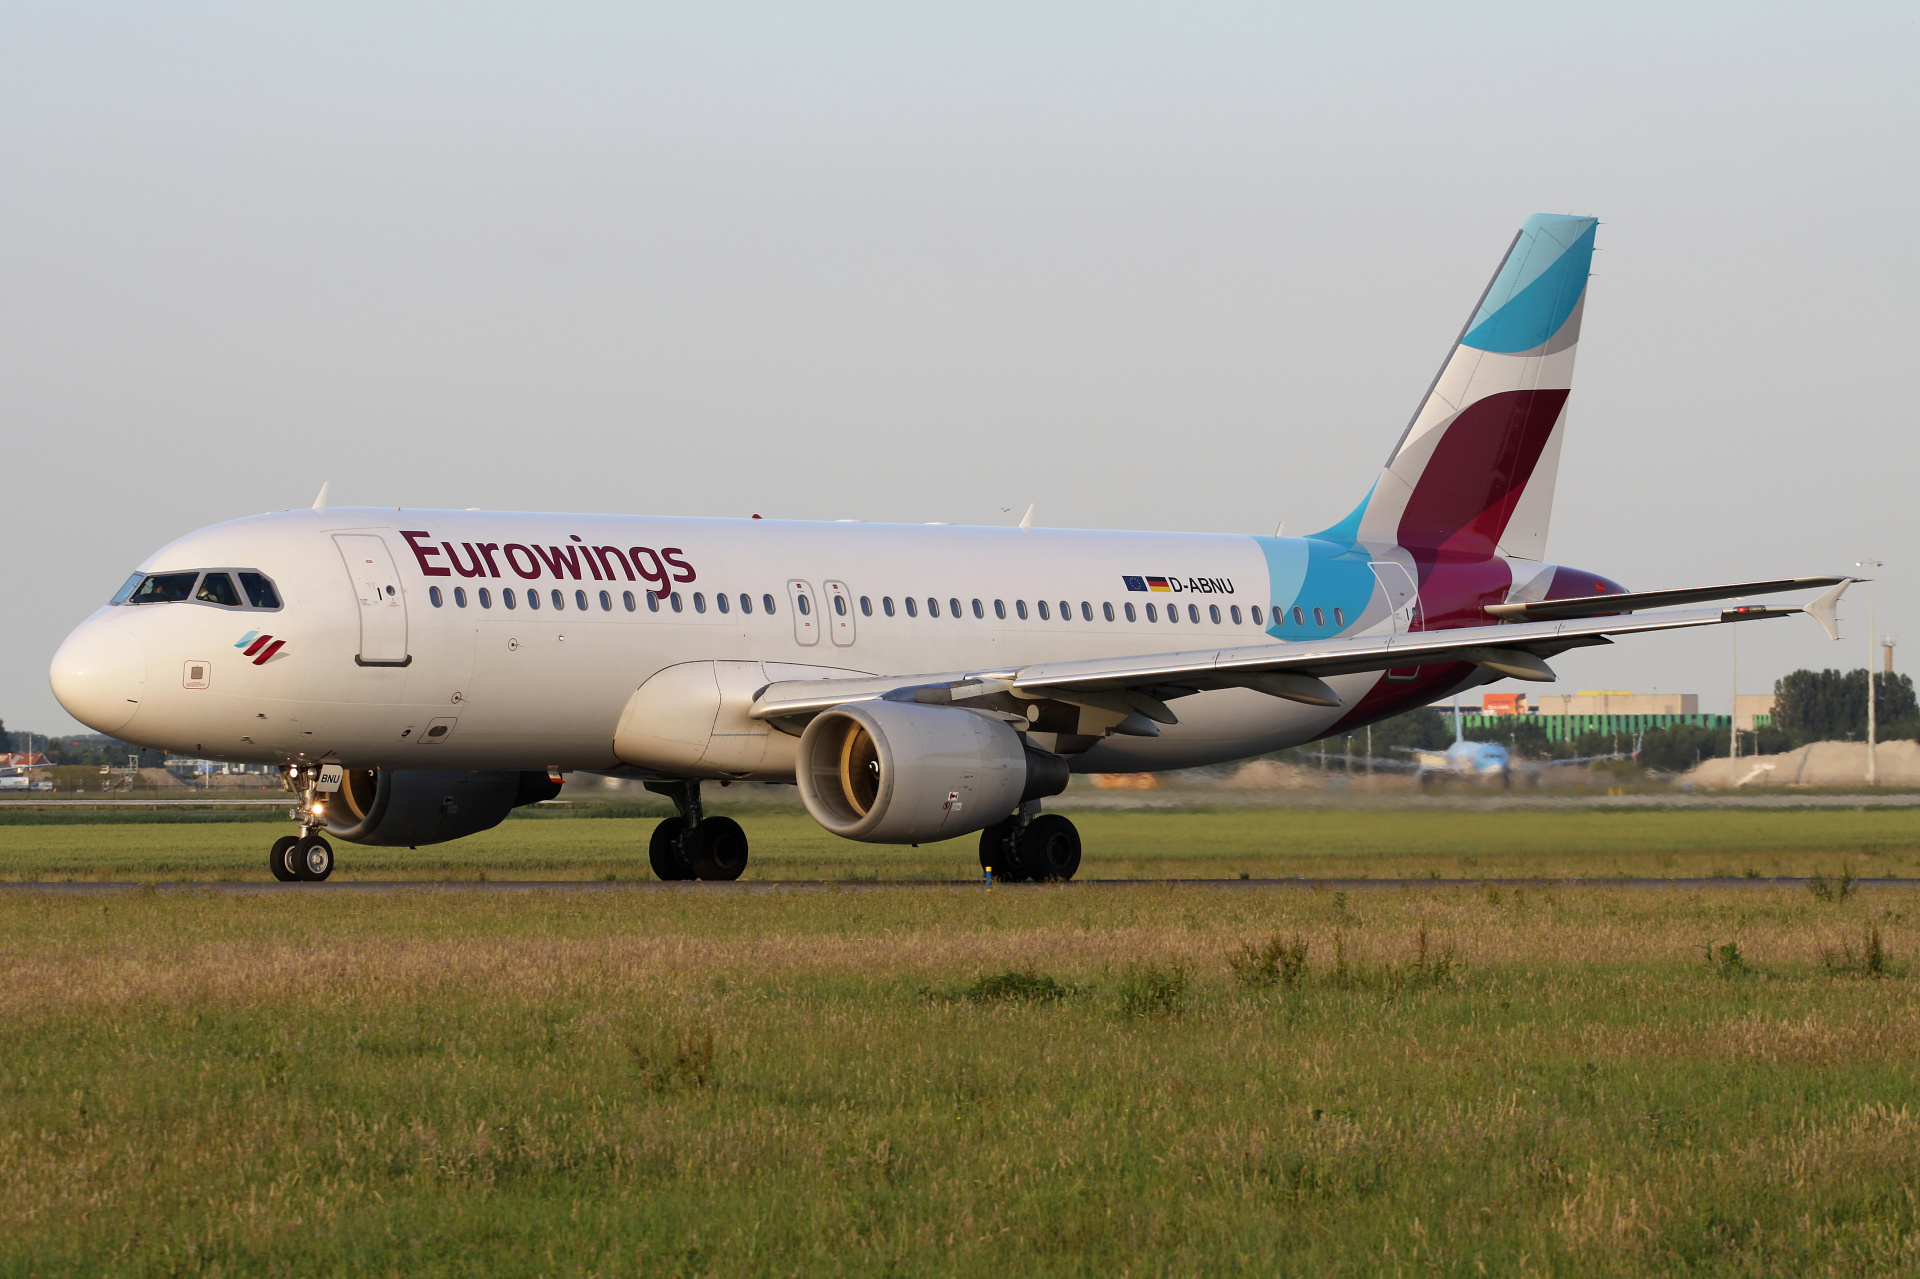 D-ABNU, Eurowings (Samoloty » Spotting na Schiphol » Airbus A320-200)